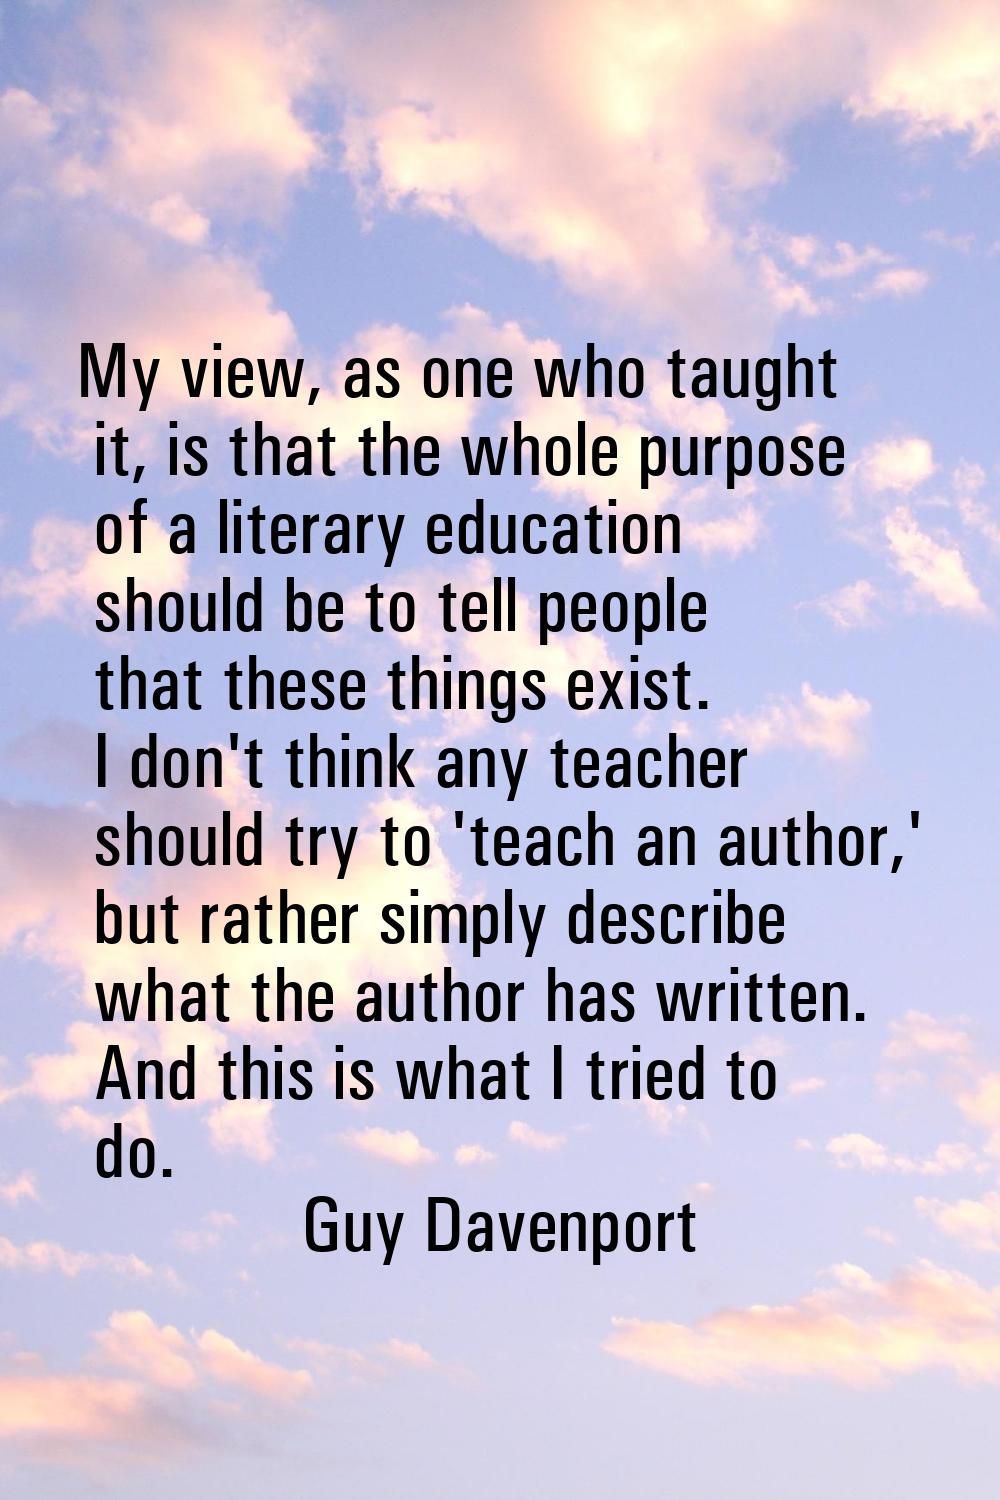 My view, as one who taught it, is that the whole purpose of a literary education should be to tell 